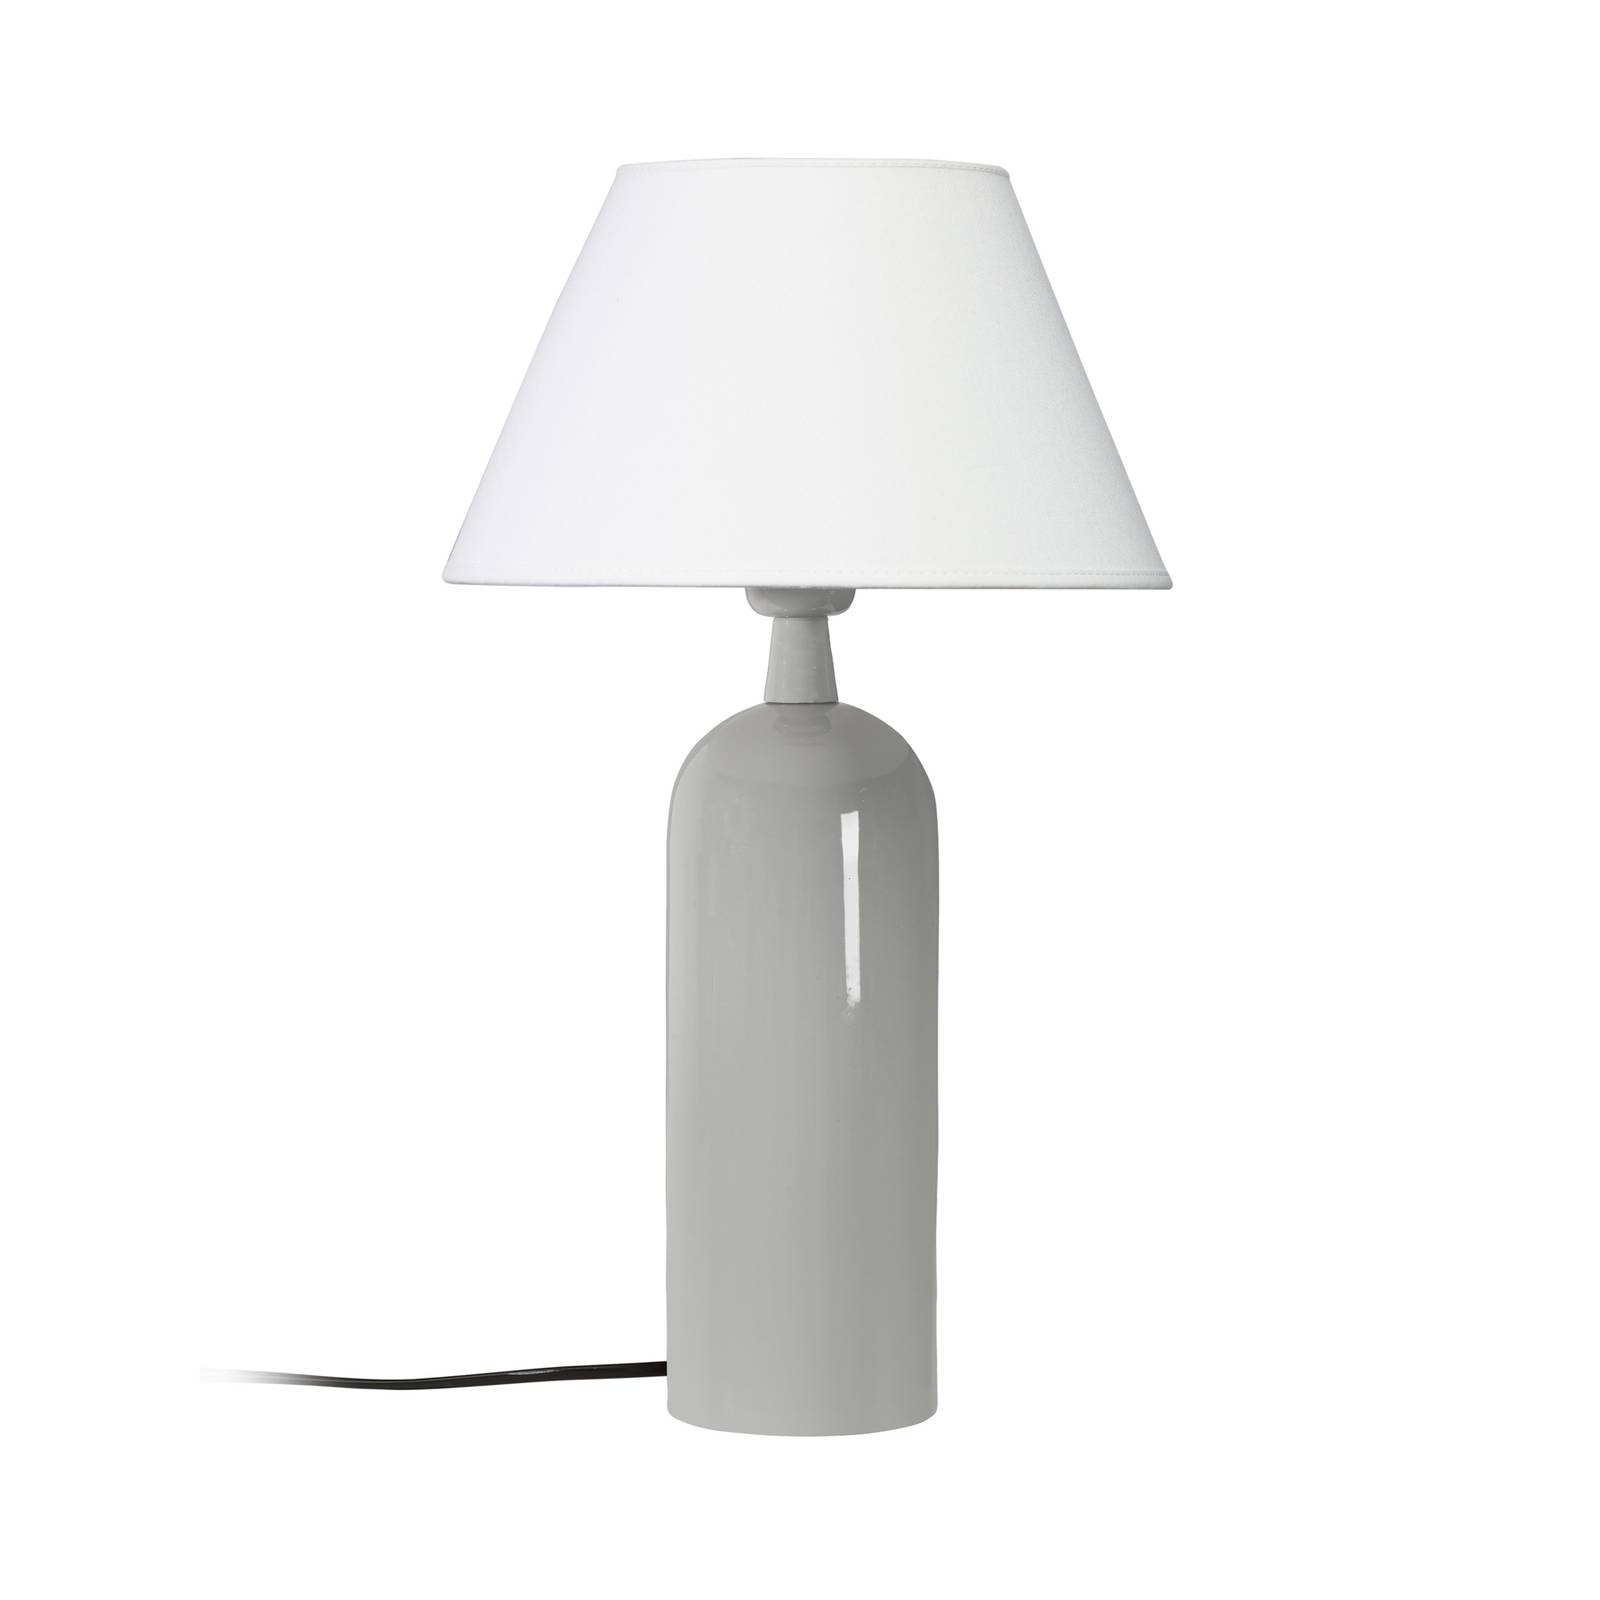 Image of PR Home Carter lampe à poser grise/blanche 7330976137343